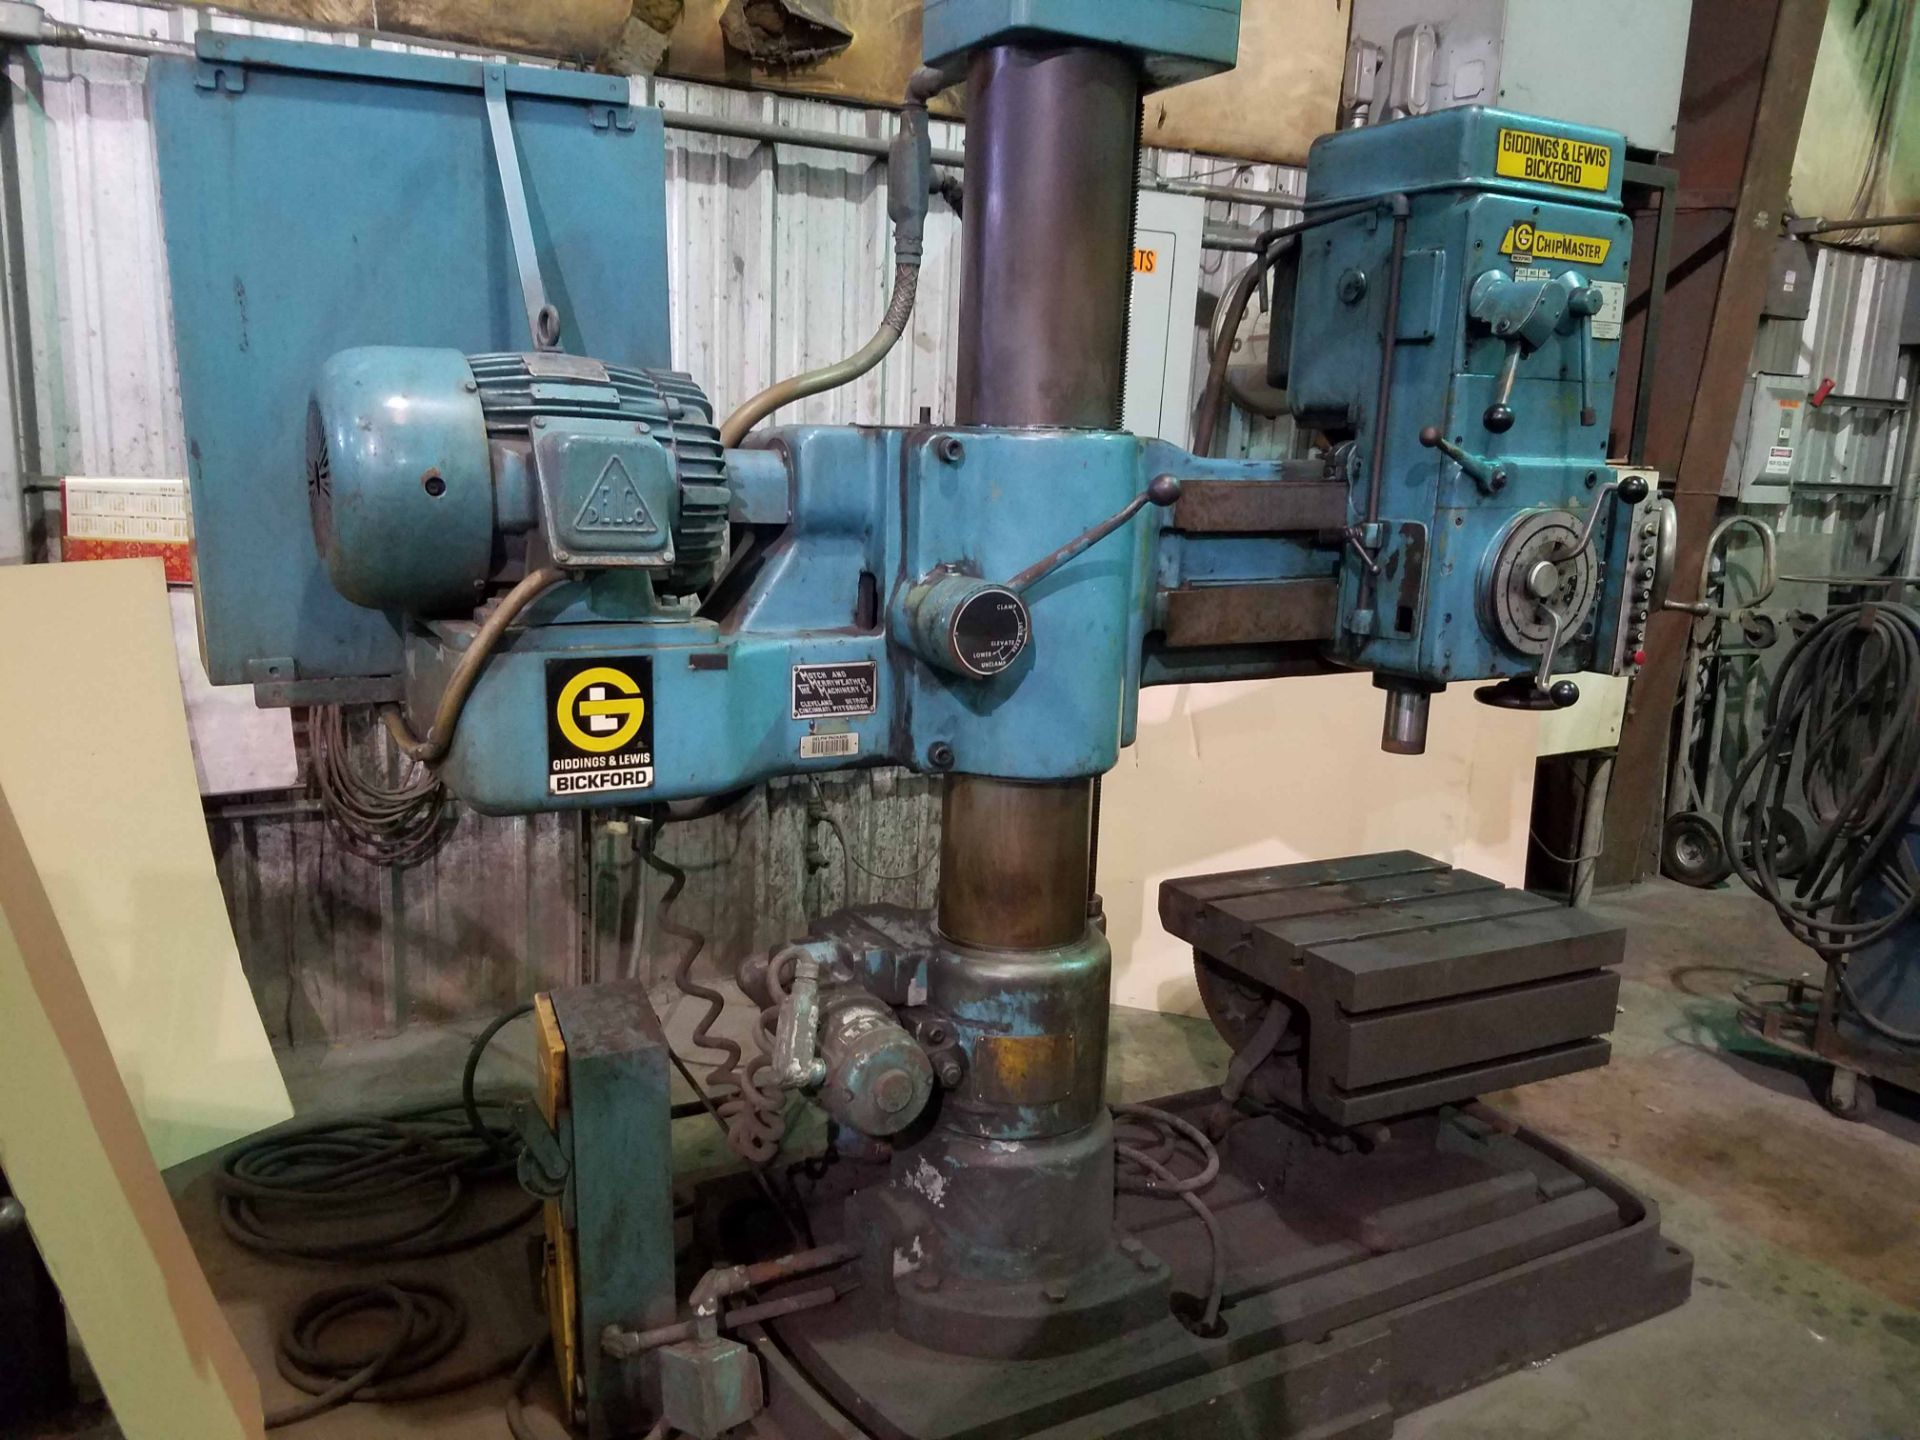 RADIAL ARM DRILL, 3' X 9" GIDDINGS & LEWIS BICKFORD, Chipmaster, S/N 951-00565-74. (Location BB: - Image 3 of 4